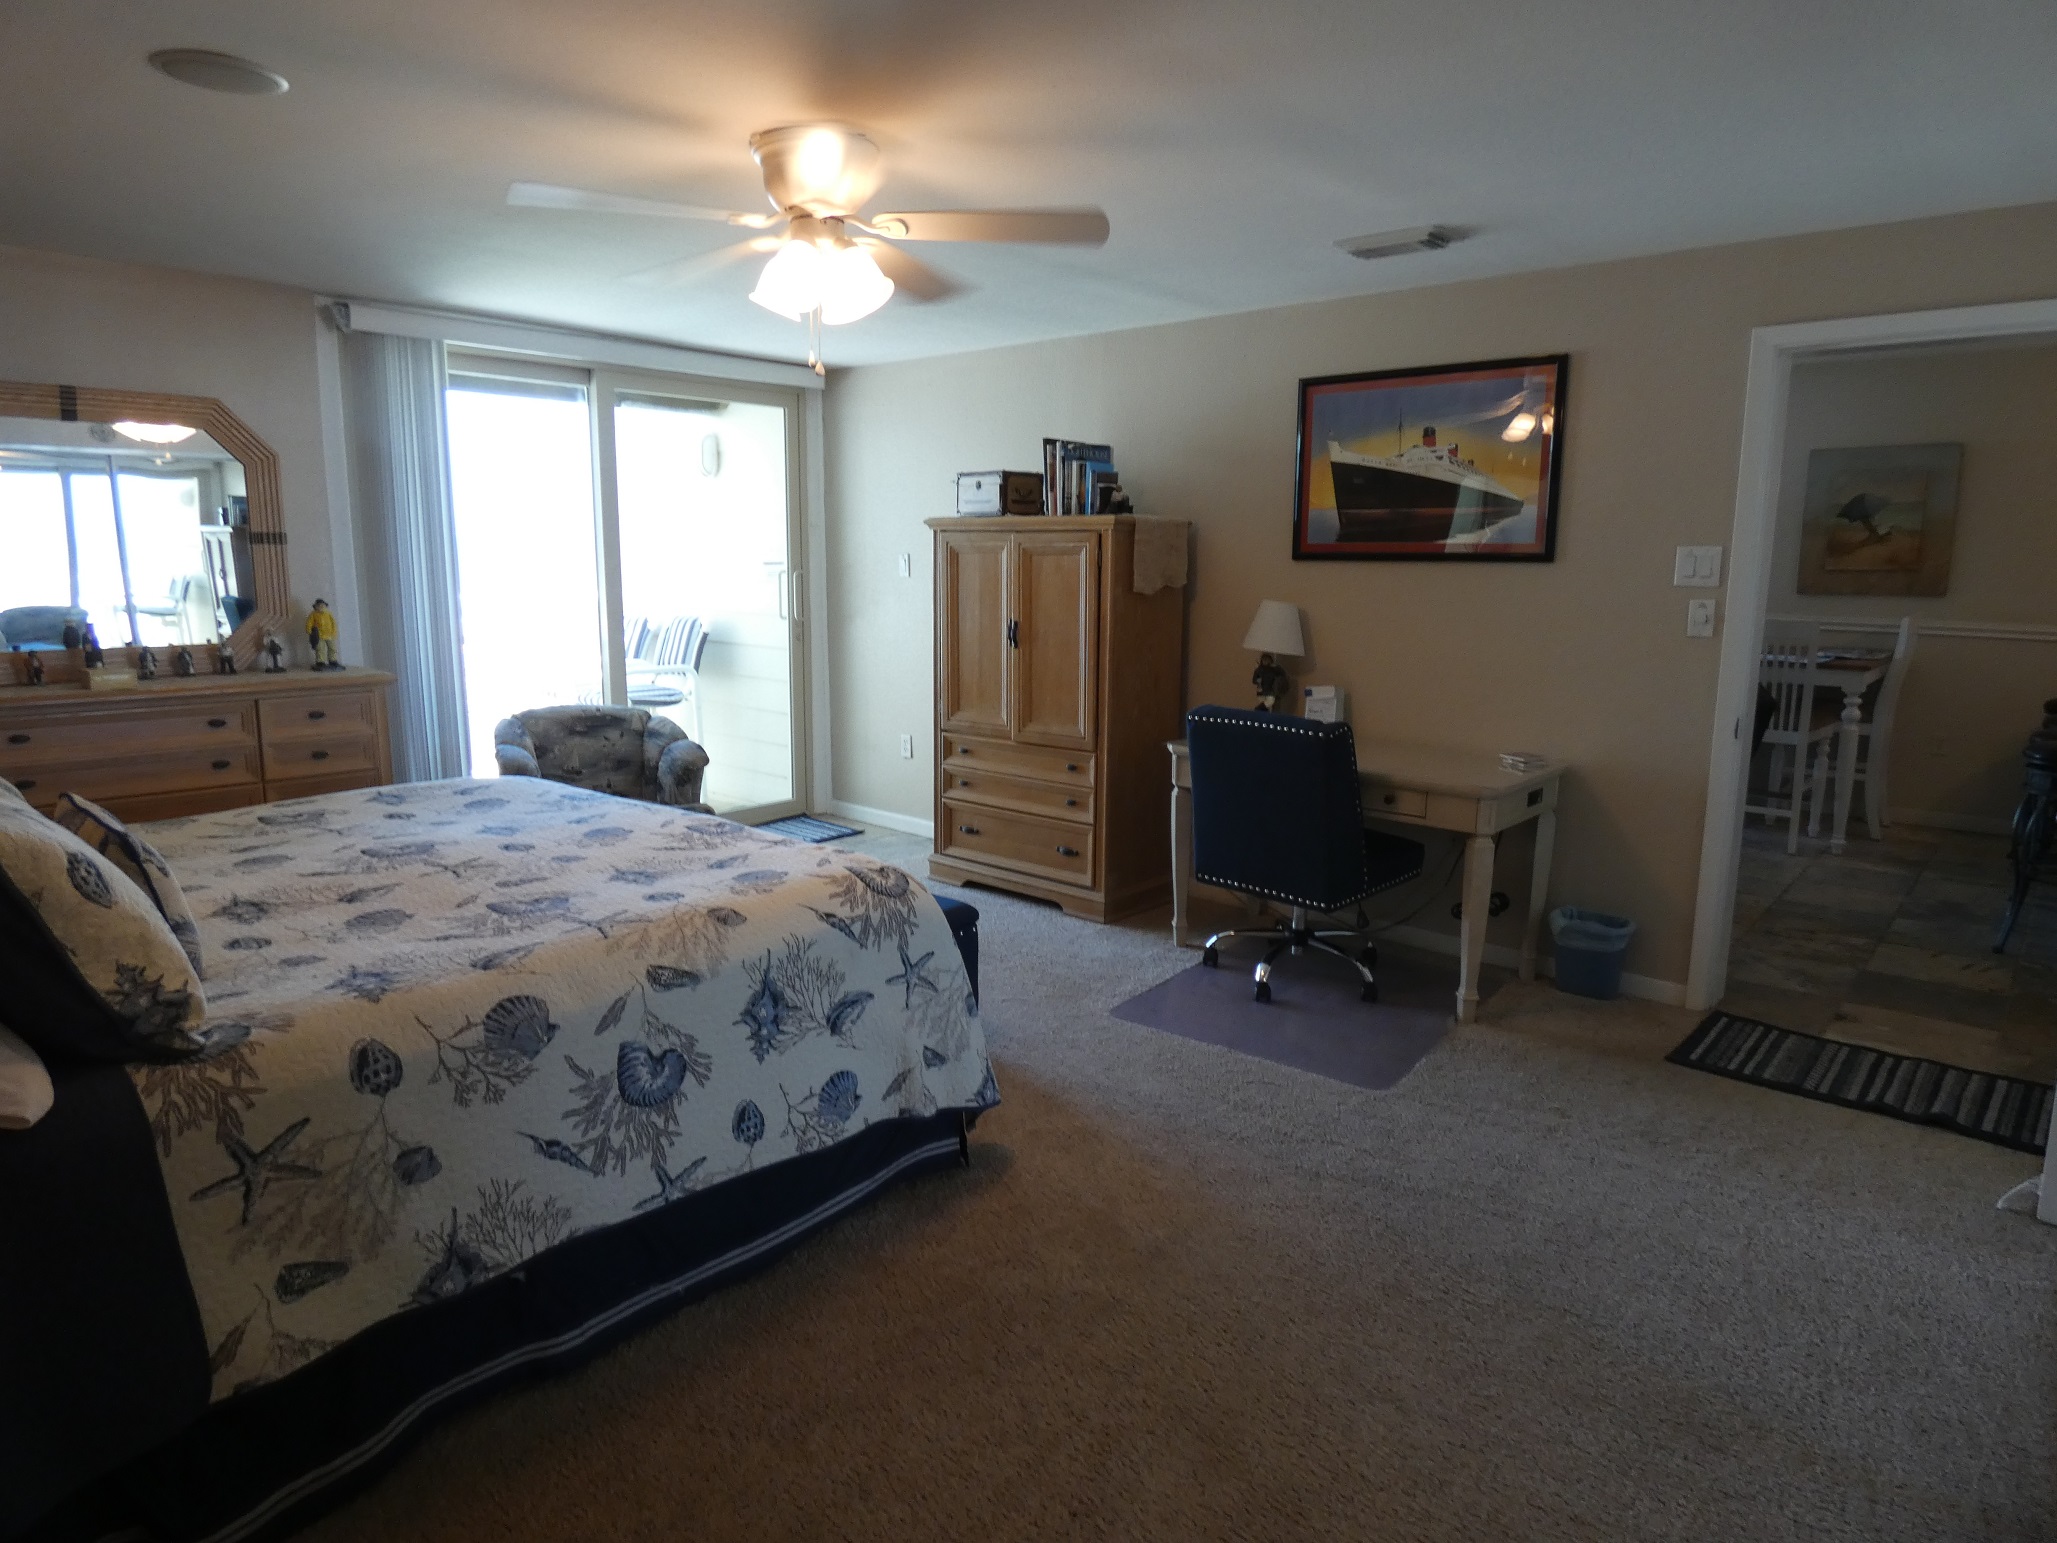 south padre island vacation condo for rent